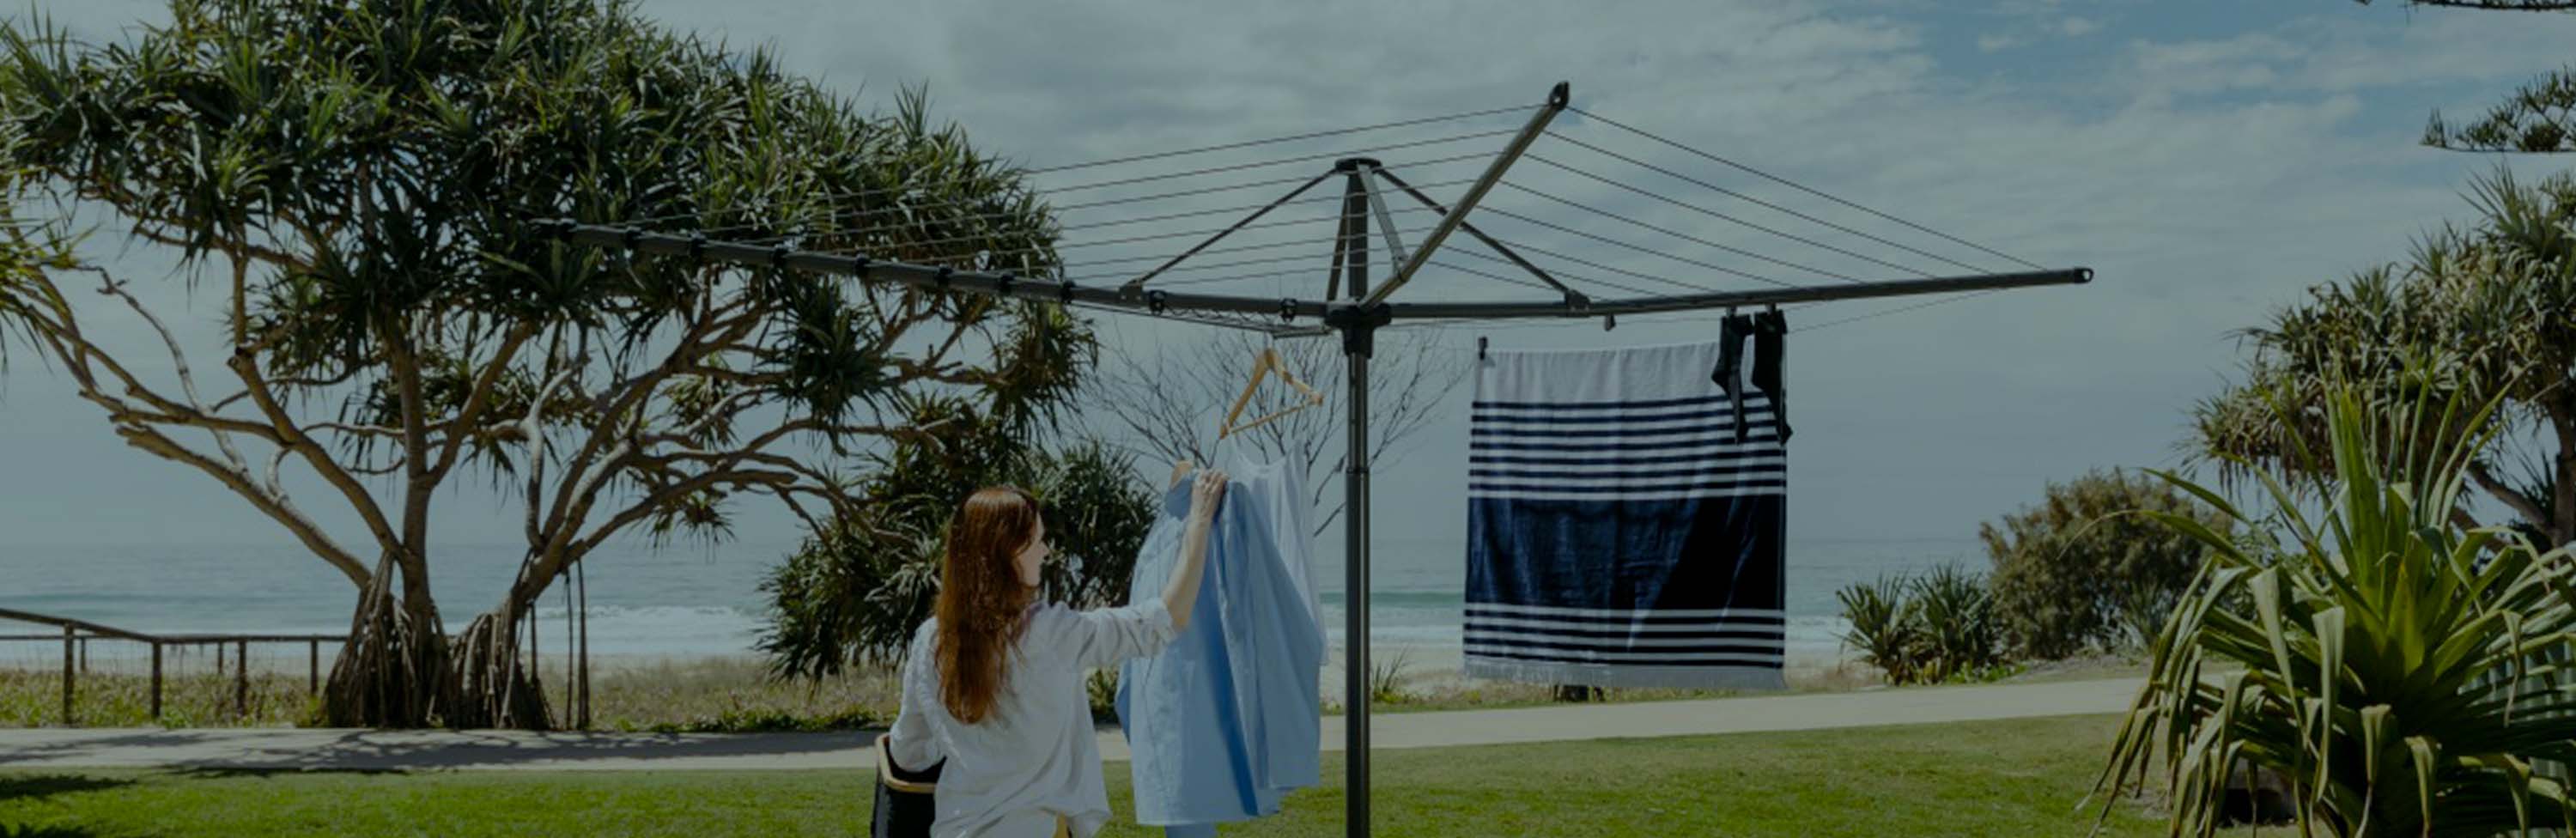 Removable and folding rotary clothesline with woman hanging laundry on the line.